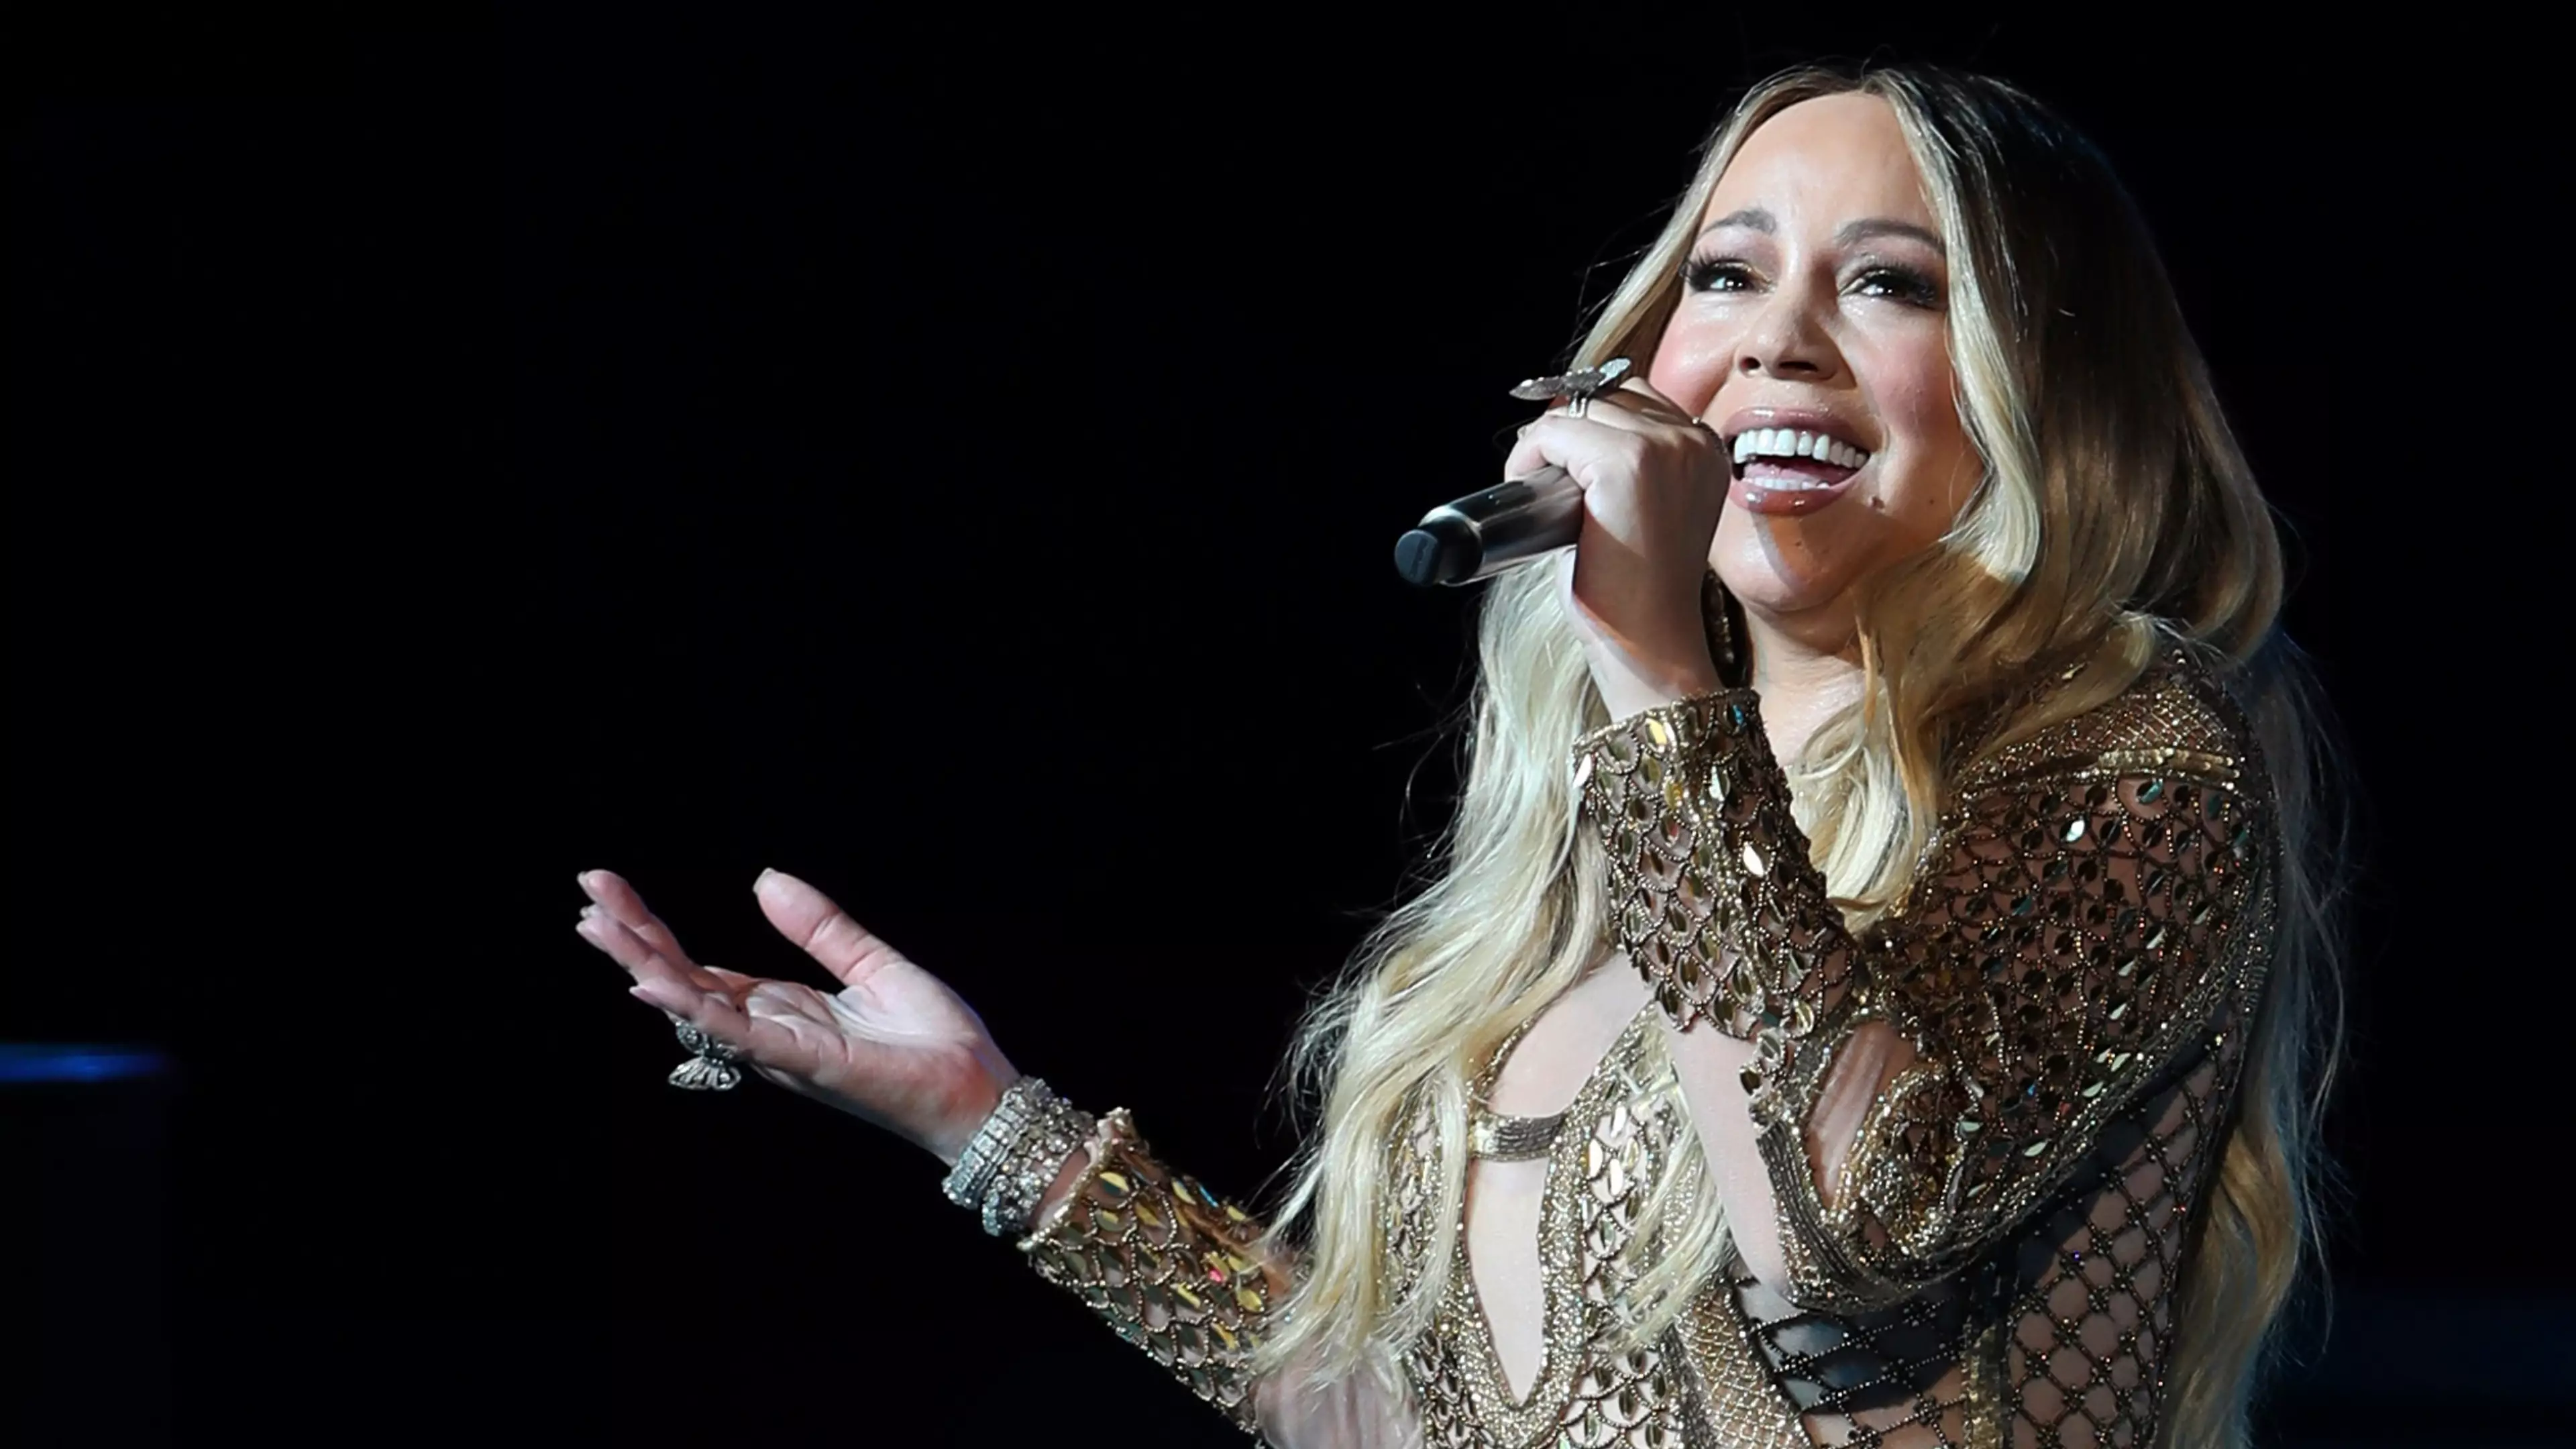 Mariah Carey's 'All I Want For Christmas Is You' Voted Most Annoying Christmas Song In UK Poll